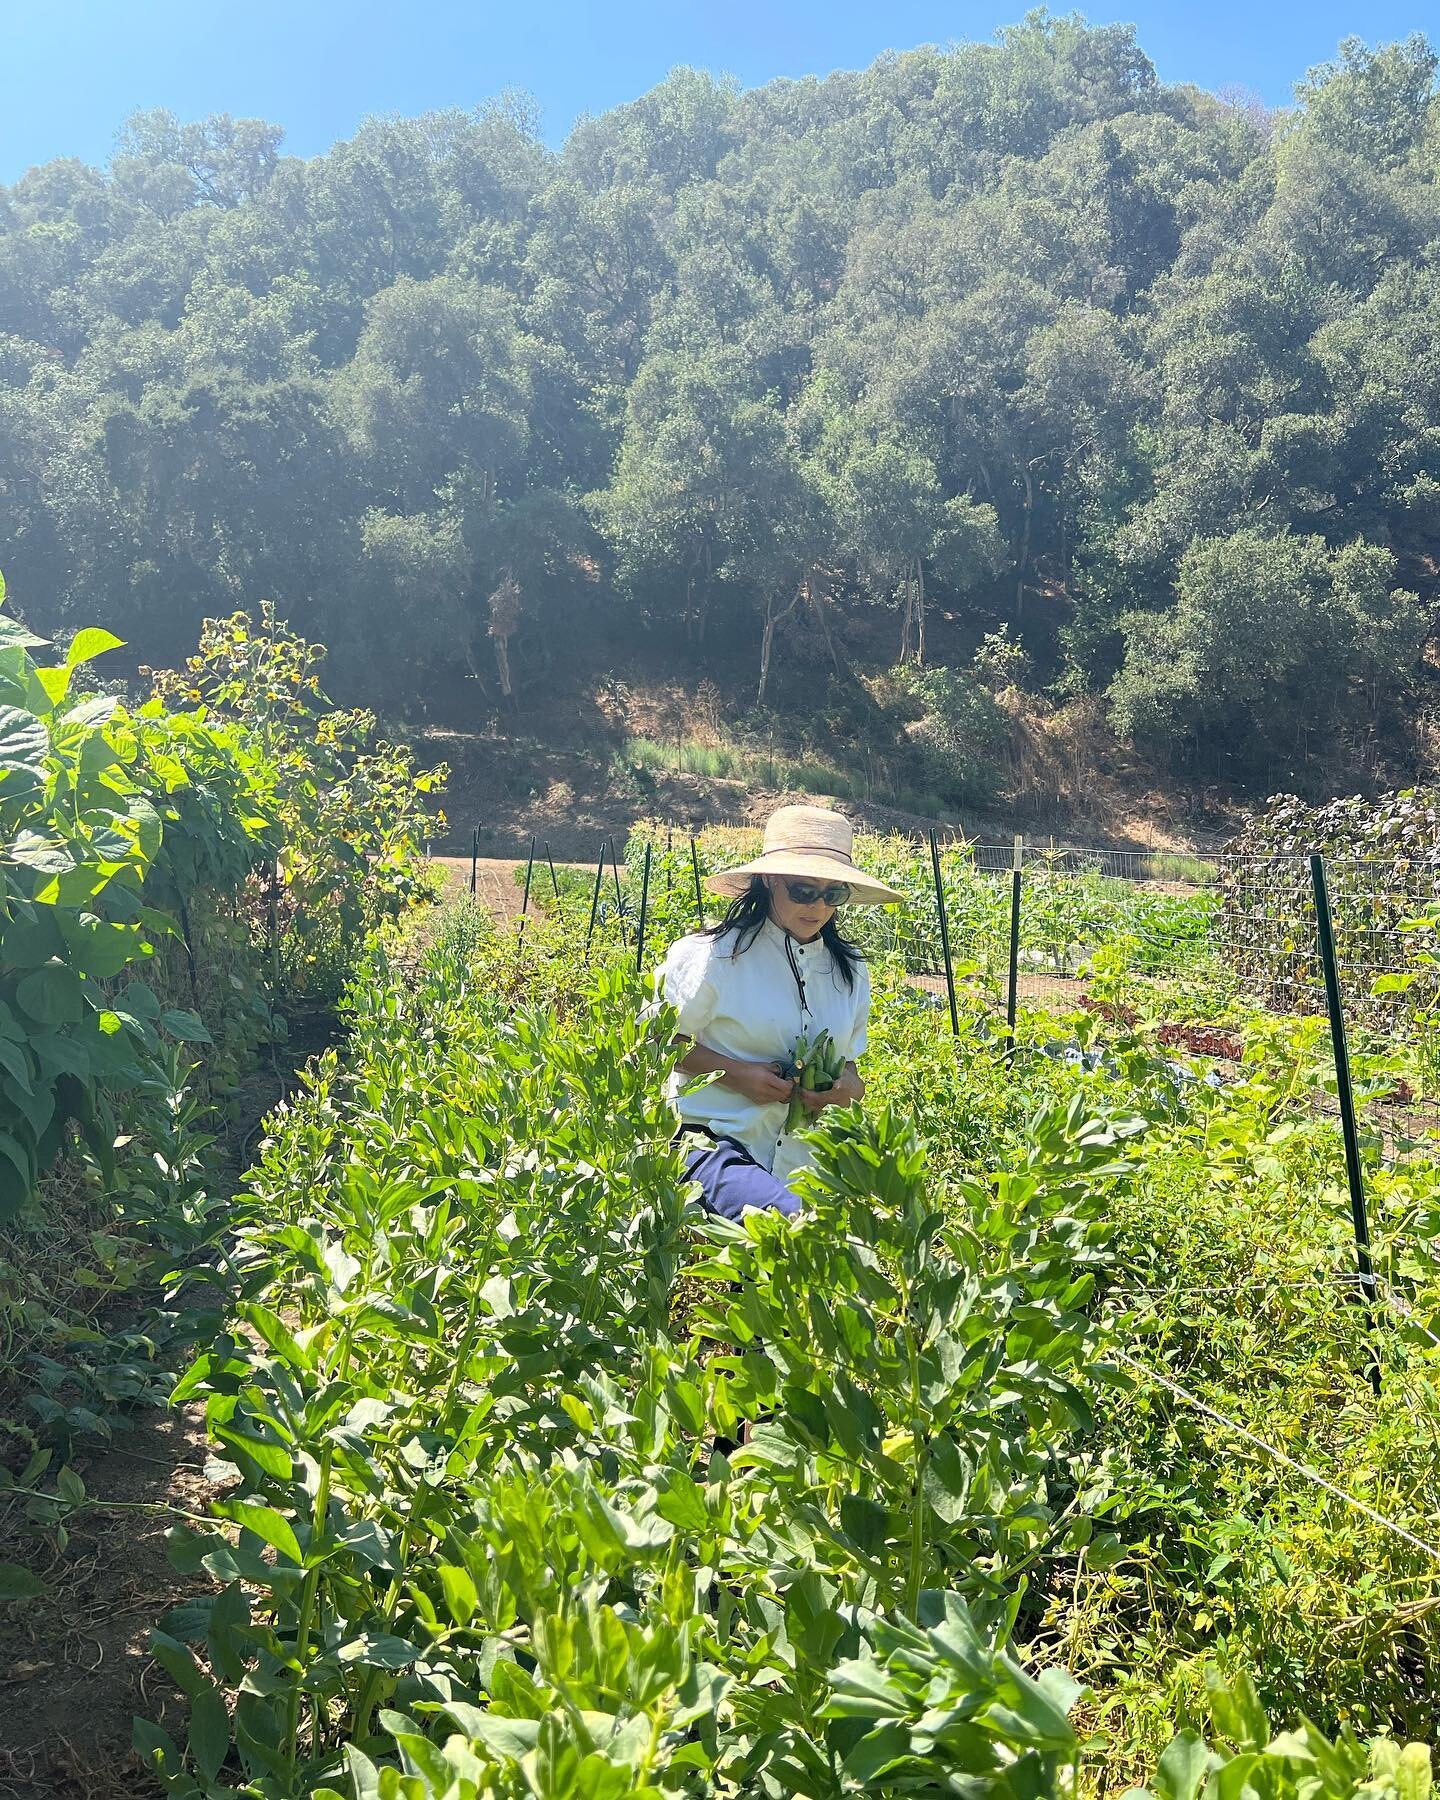 It was a fruitful week at this beautiful, organic farm (and only 11 miles from the restaurant). Can&rsquo;t wait to start working on some new dishes with today&rsquo;s harvest! @stonybrookcanyonfarm